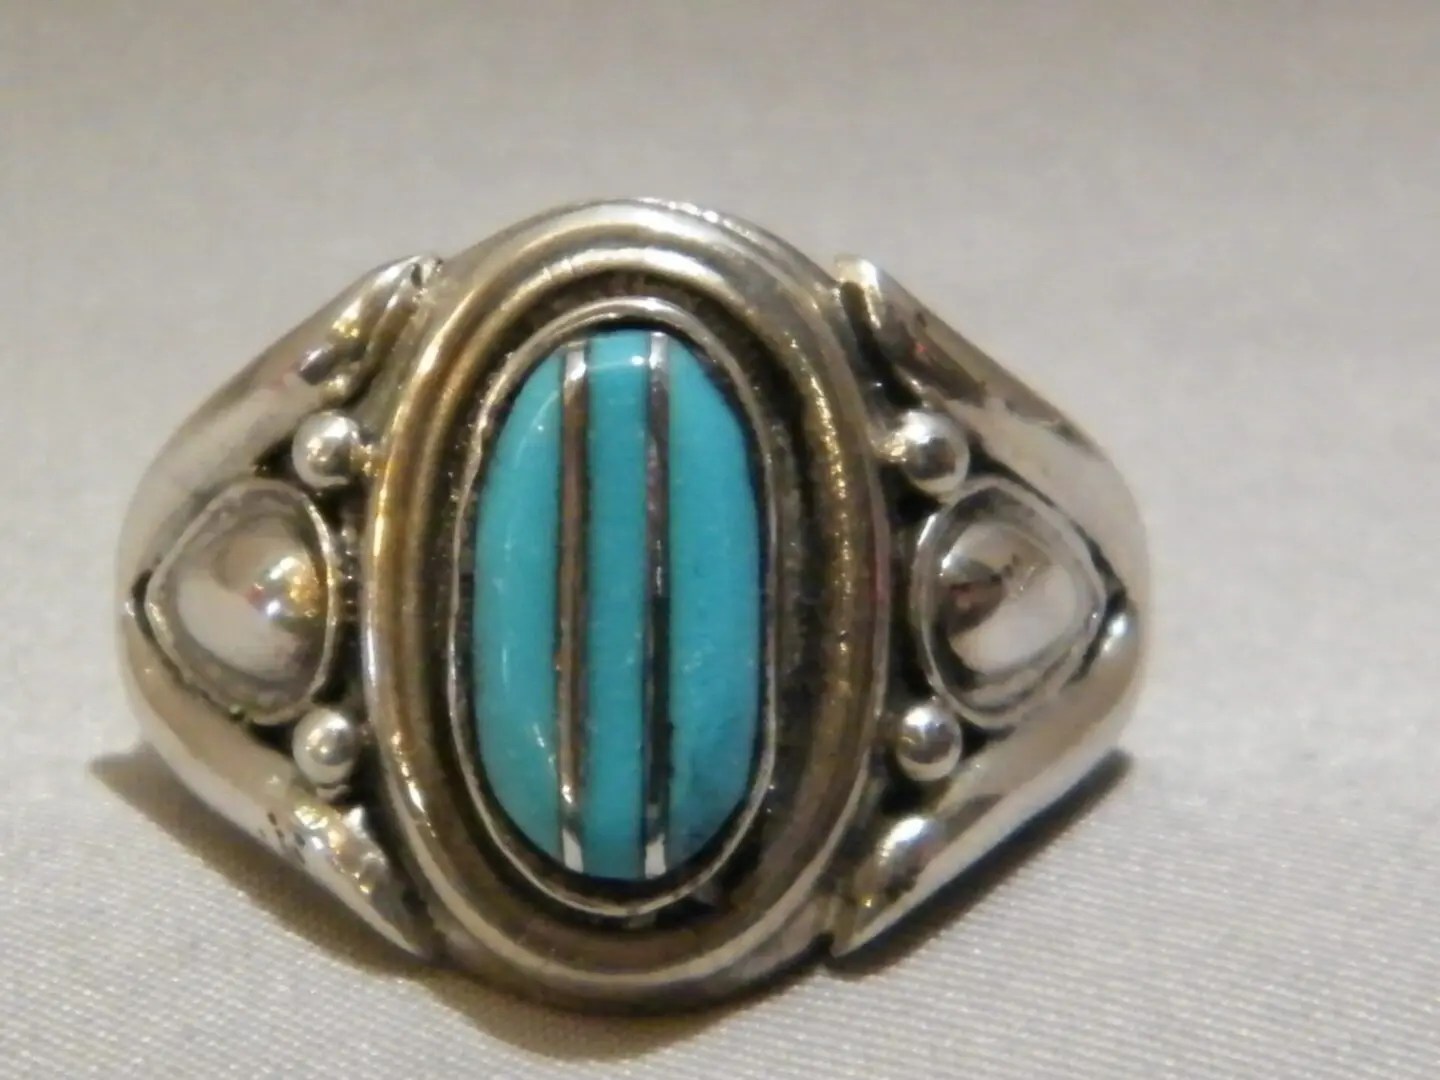 A Sterling Silver Turquoise Oval Shape Ring for Men